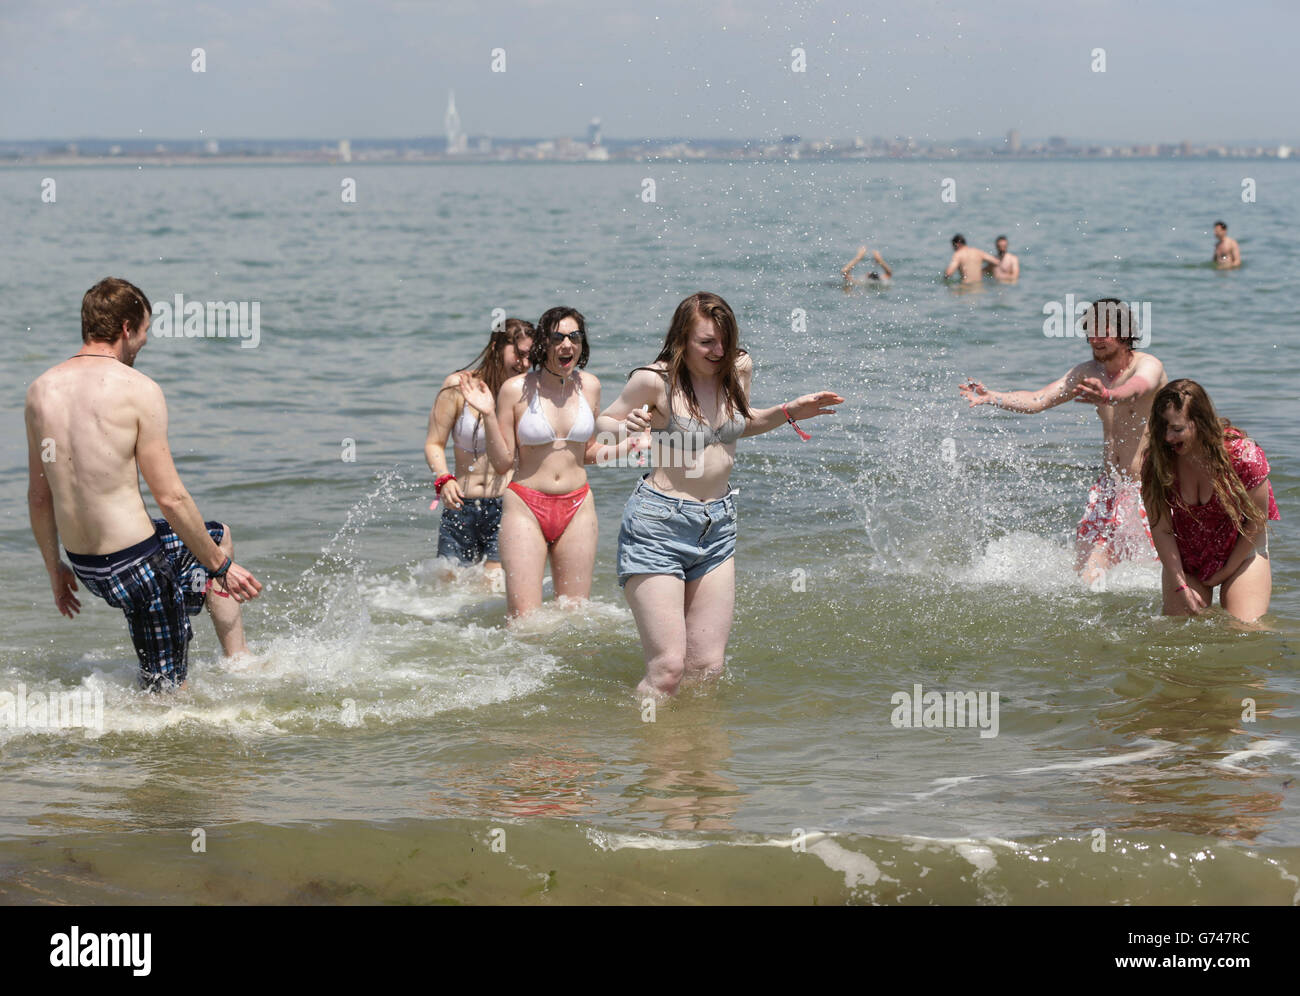 Festival goers taking a dip in the sea at the beach in Ryde, before heading to the Isle of Wight Festival. Stock Photo